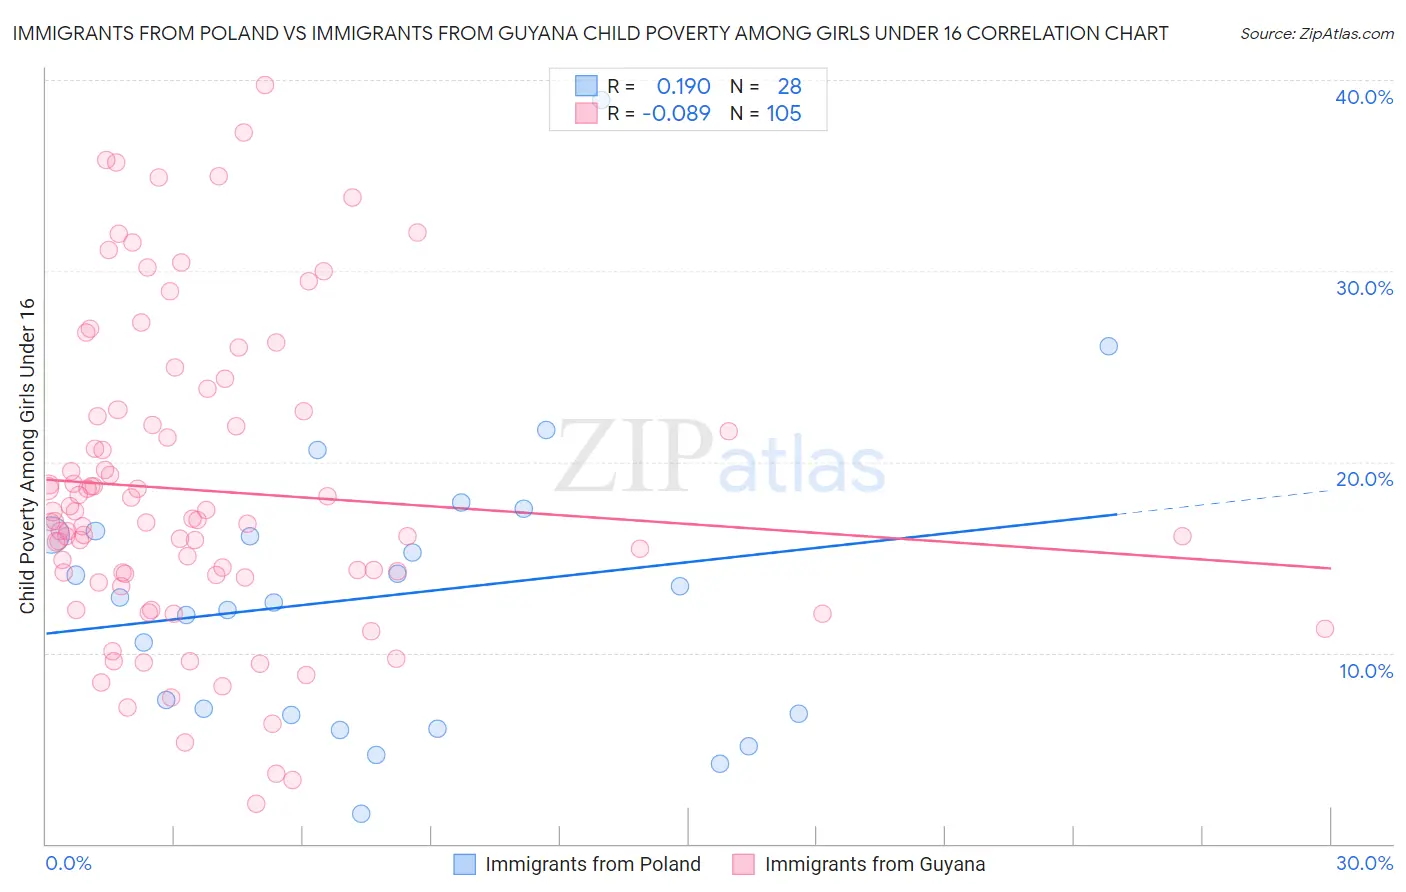 Immigrants from Poland vs Immigrants from Guyana Child Poverty Among Girls Under 16